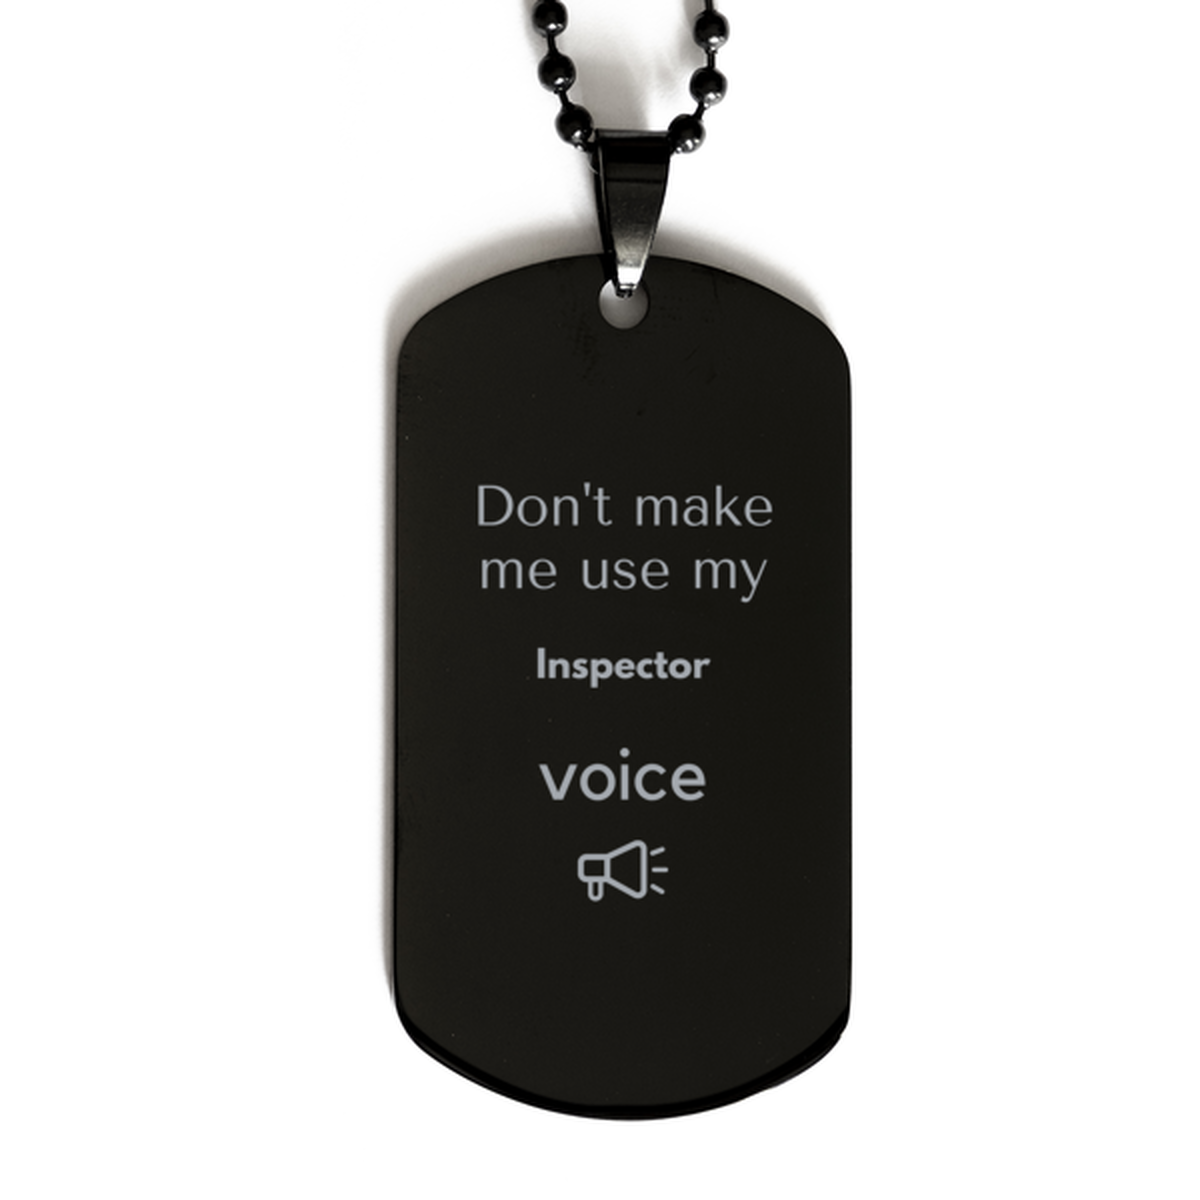 Don't make me use my Inspector voice, Sarcasm Inspector Gifts, Christmas Inspector Black Dog Tag Birthday Unique Gifts For Inspector Coworkers, Men, Women, Colleague, Friends